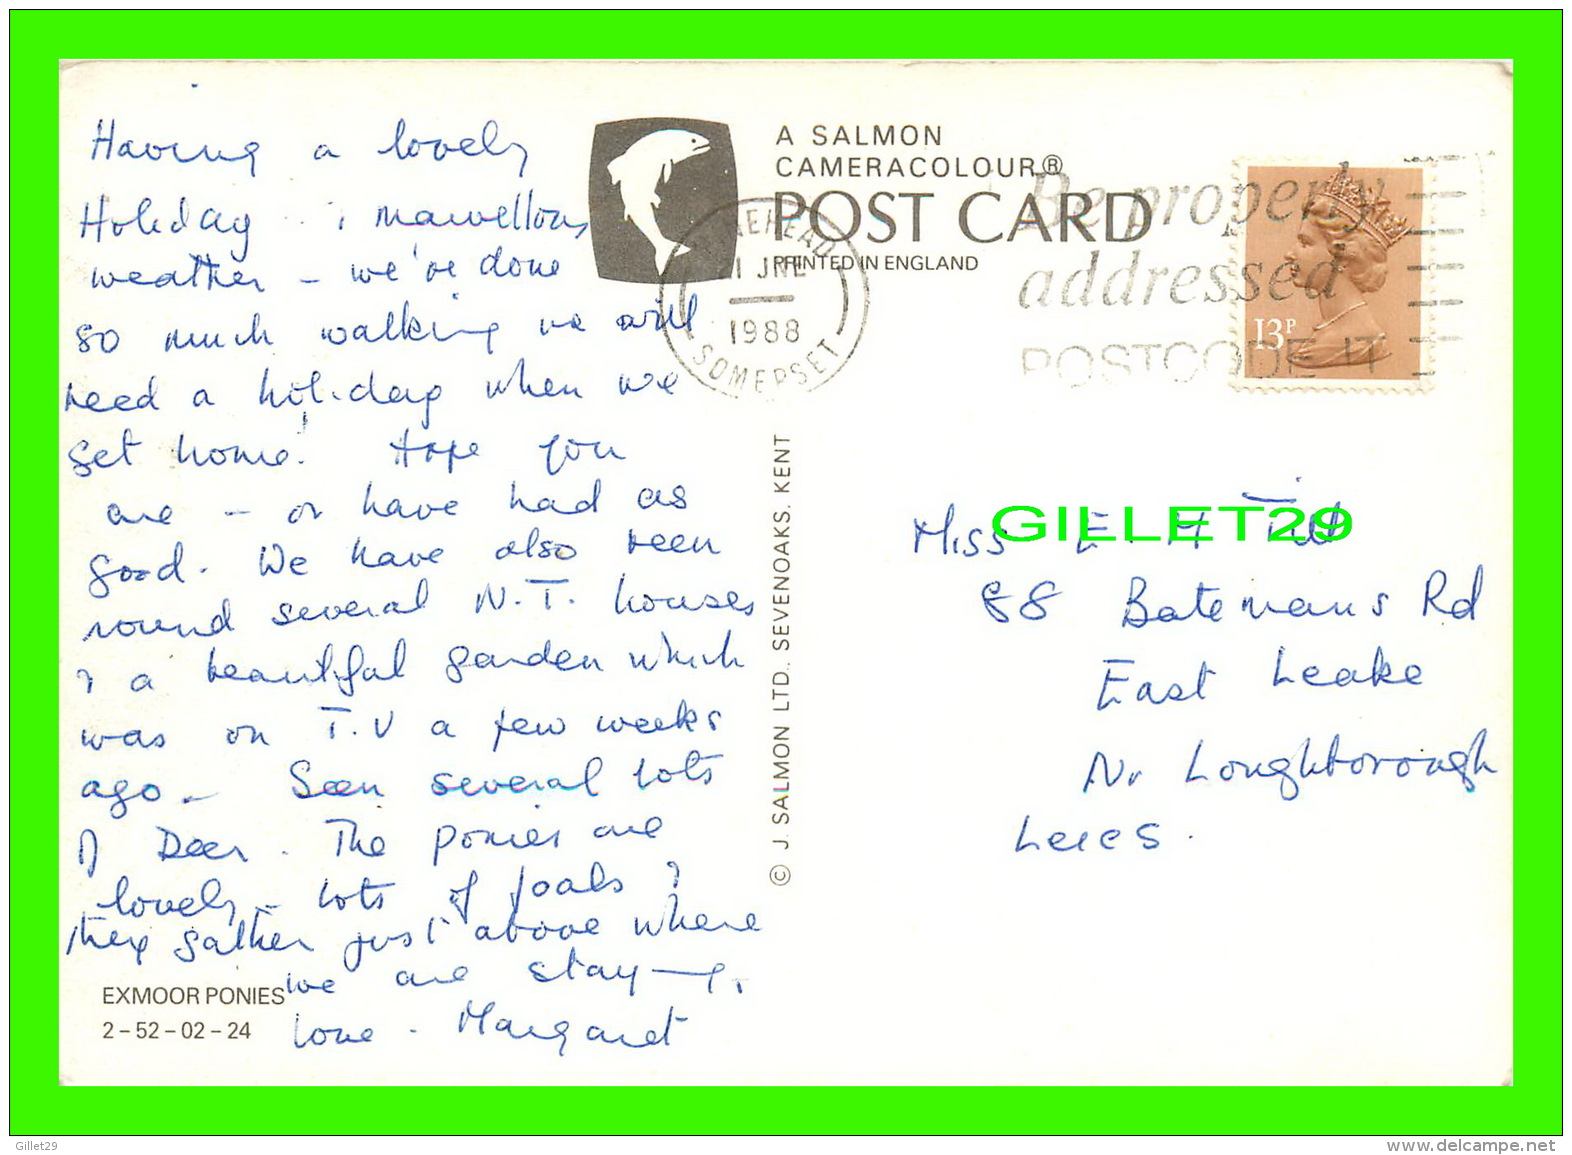 CHEVAUX - HORSES - EXMOOR PONIES -  TRAVEL IN 1988 - A SALMON POST CARD - - Chevaux